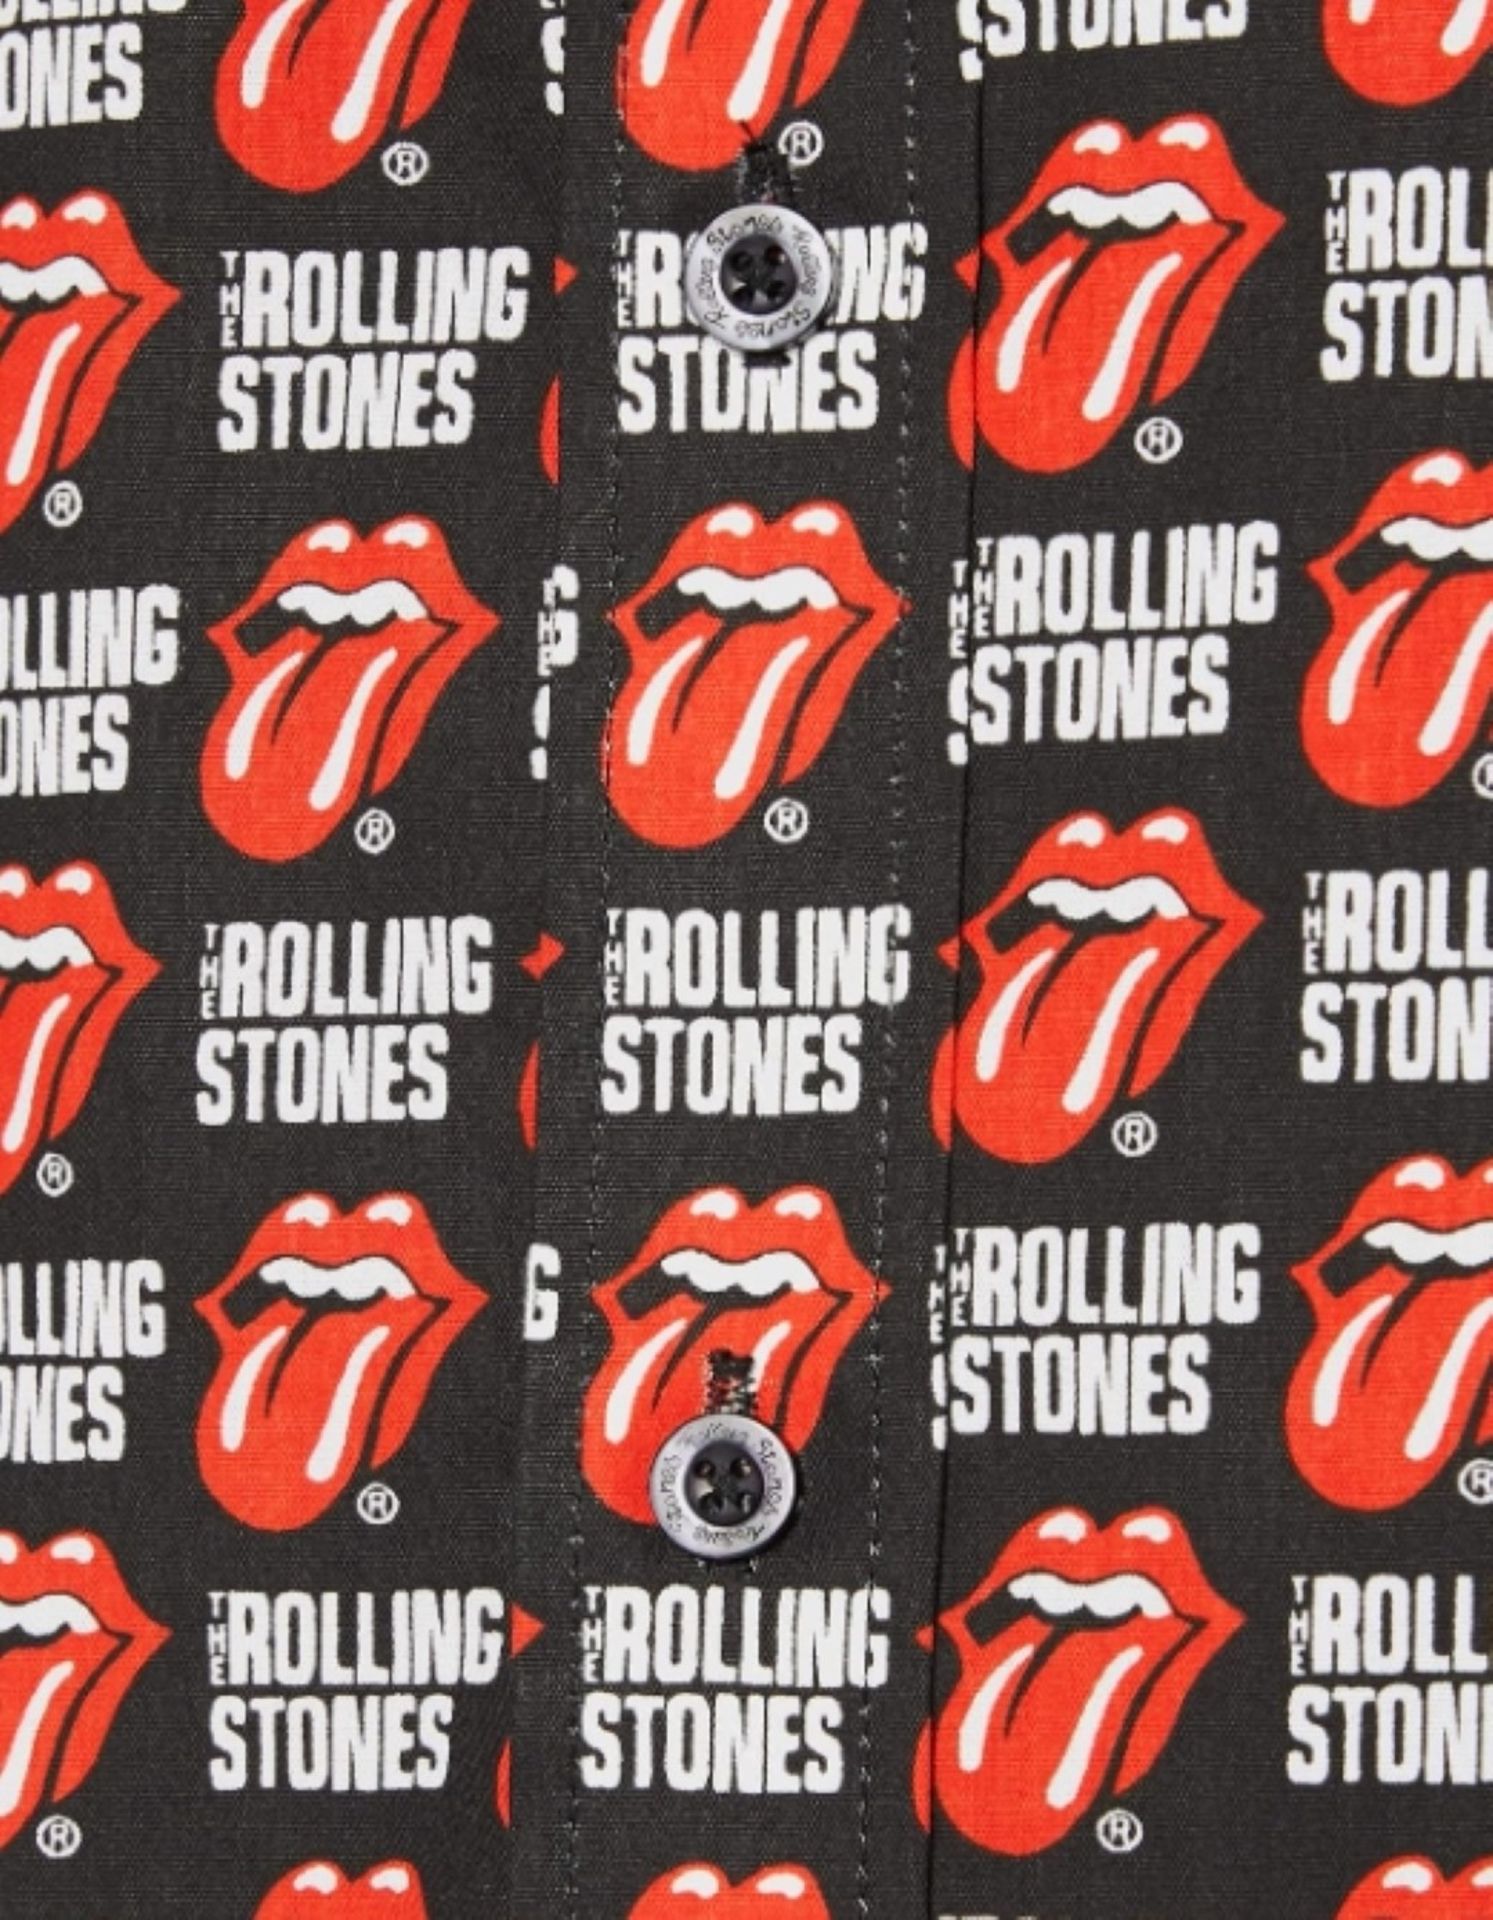 1 x Rolling Stones Talk and Text Casual Button Shirt - Size: Large - Officially Licensed Merchandise - Image 12 of 12